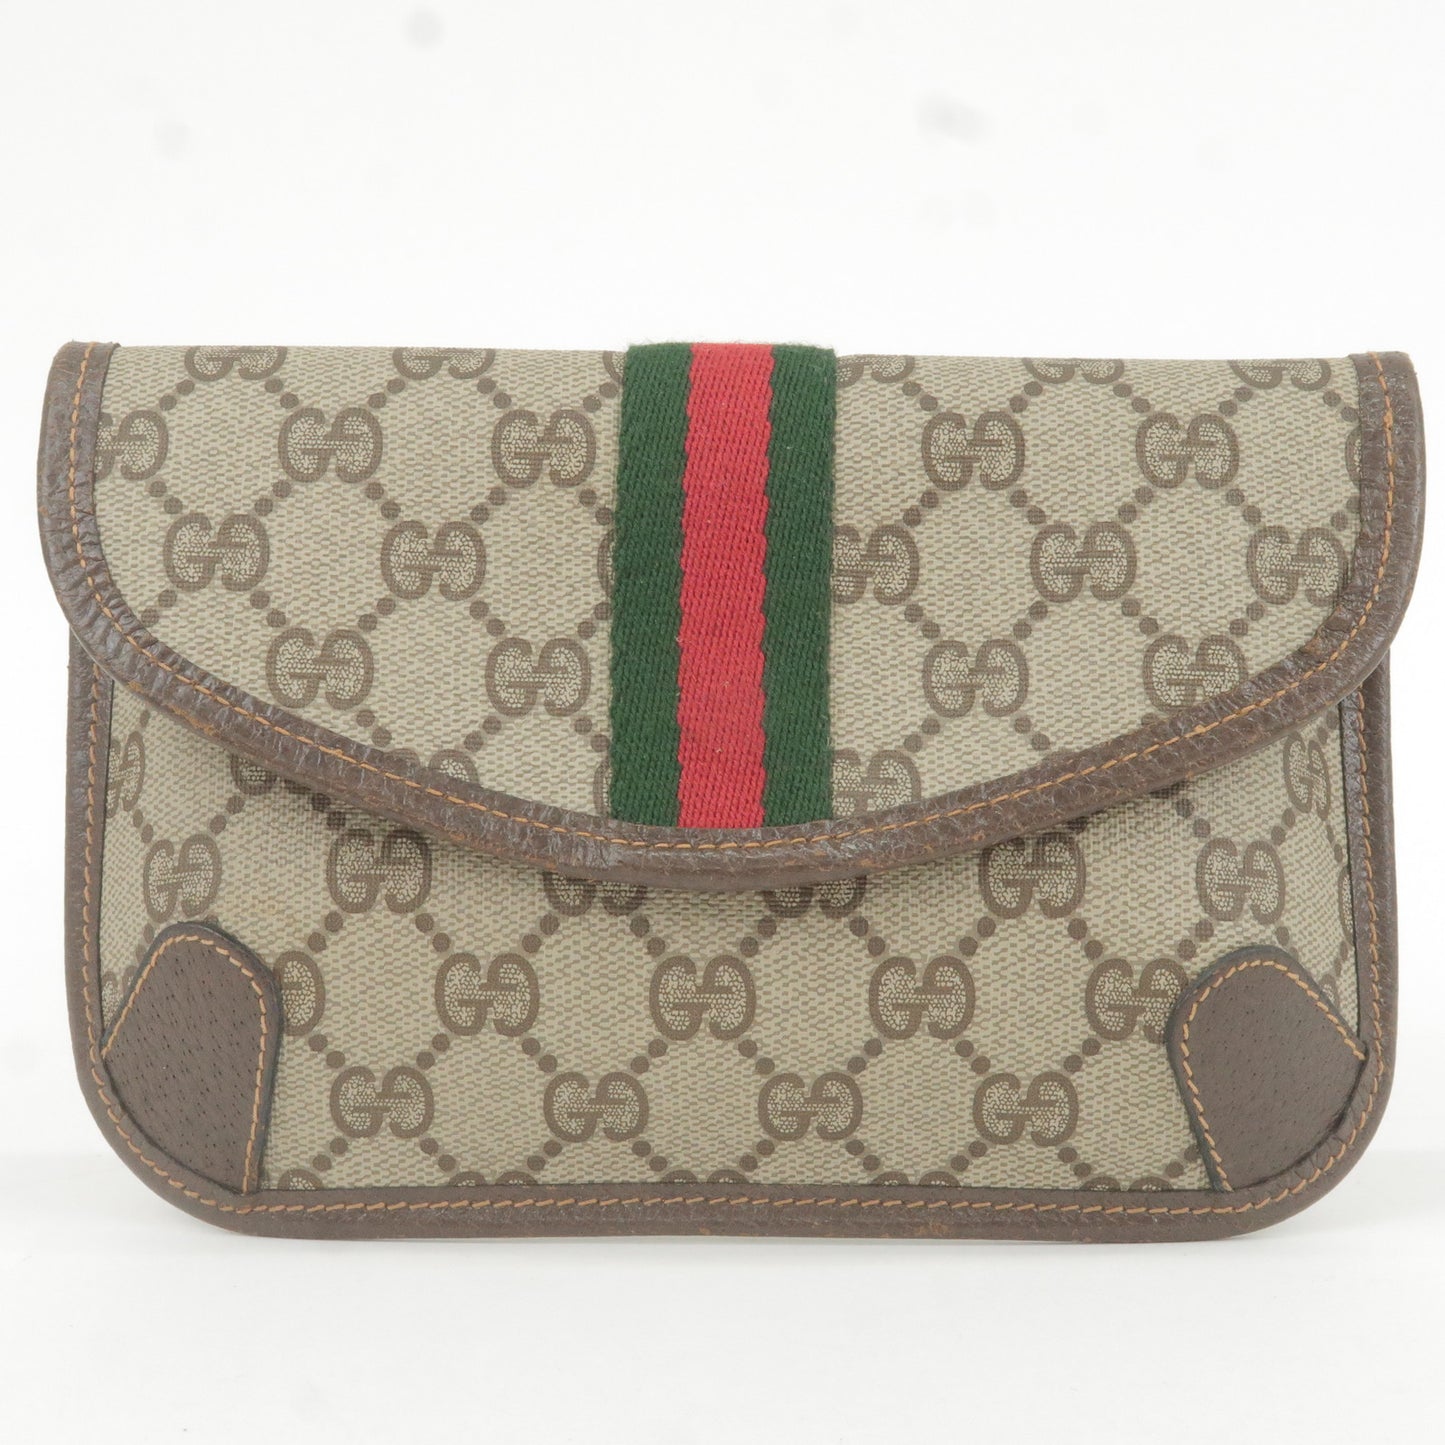 GUCCI Sherry GG Plus Leather Clutch Bag Pouch Beige 89.01.021